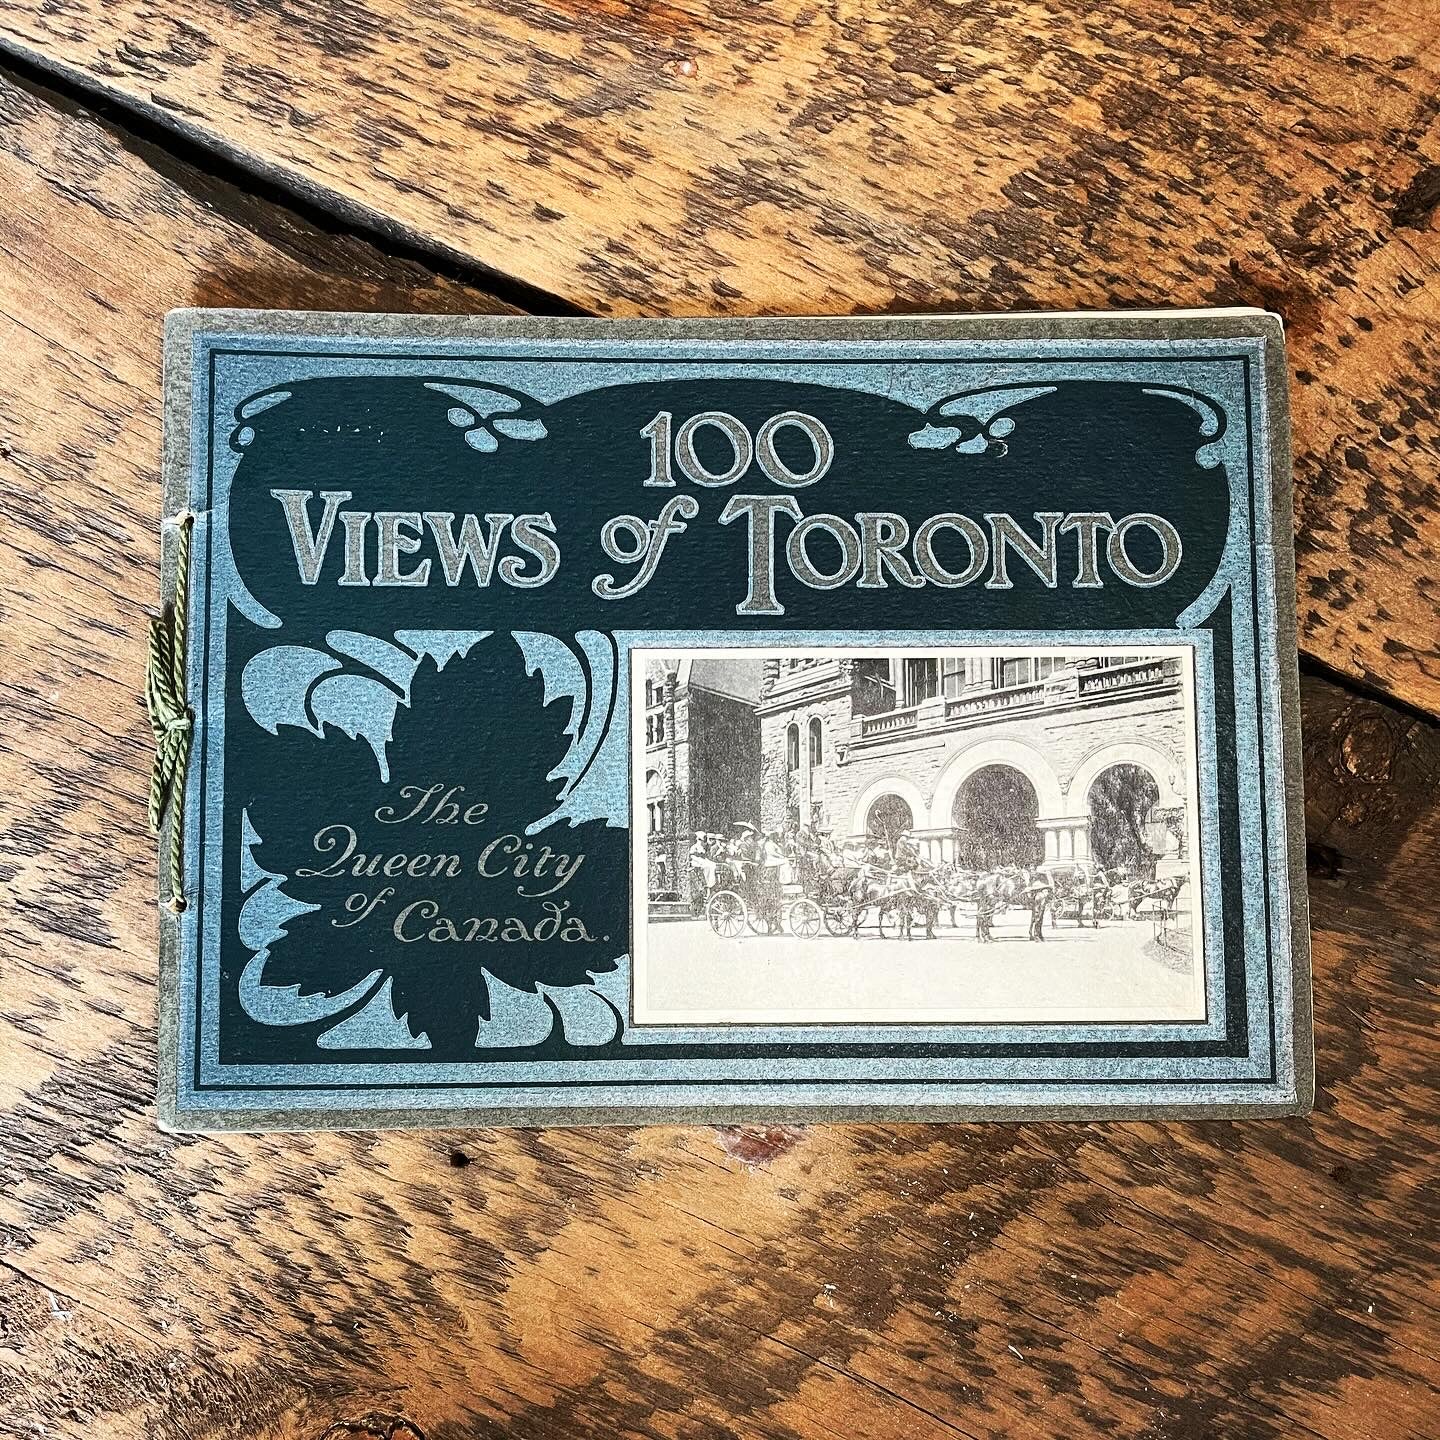 Vintage 100 Views of Toronto: the Queen City of Canada